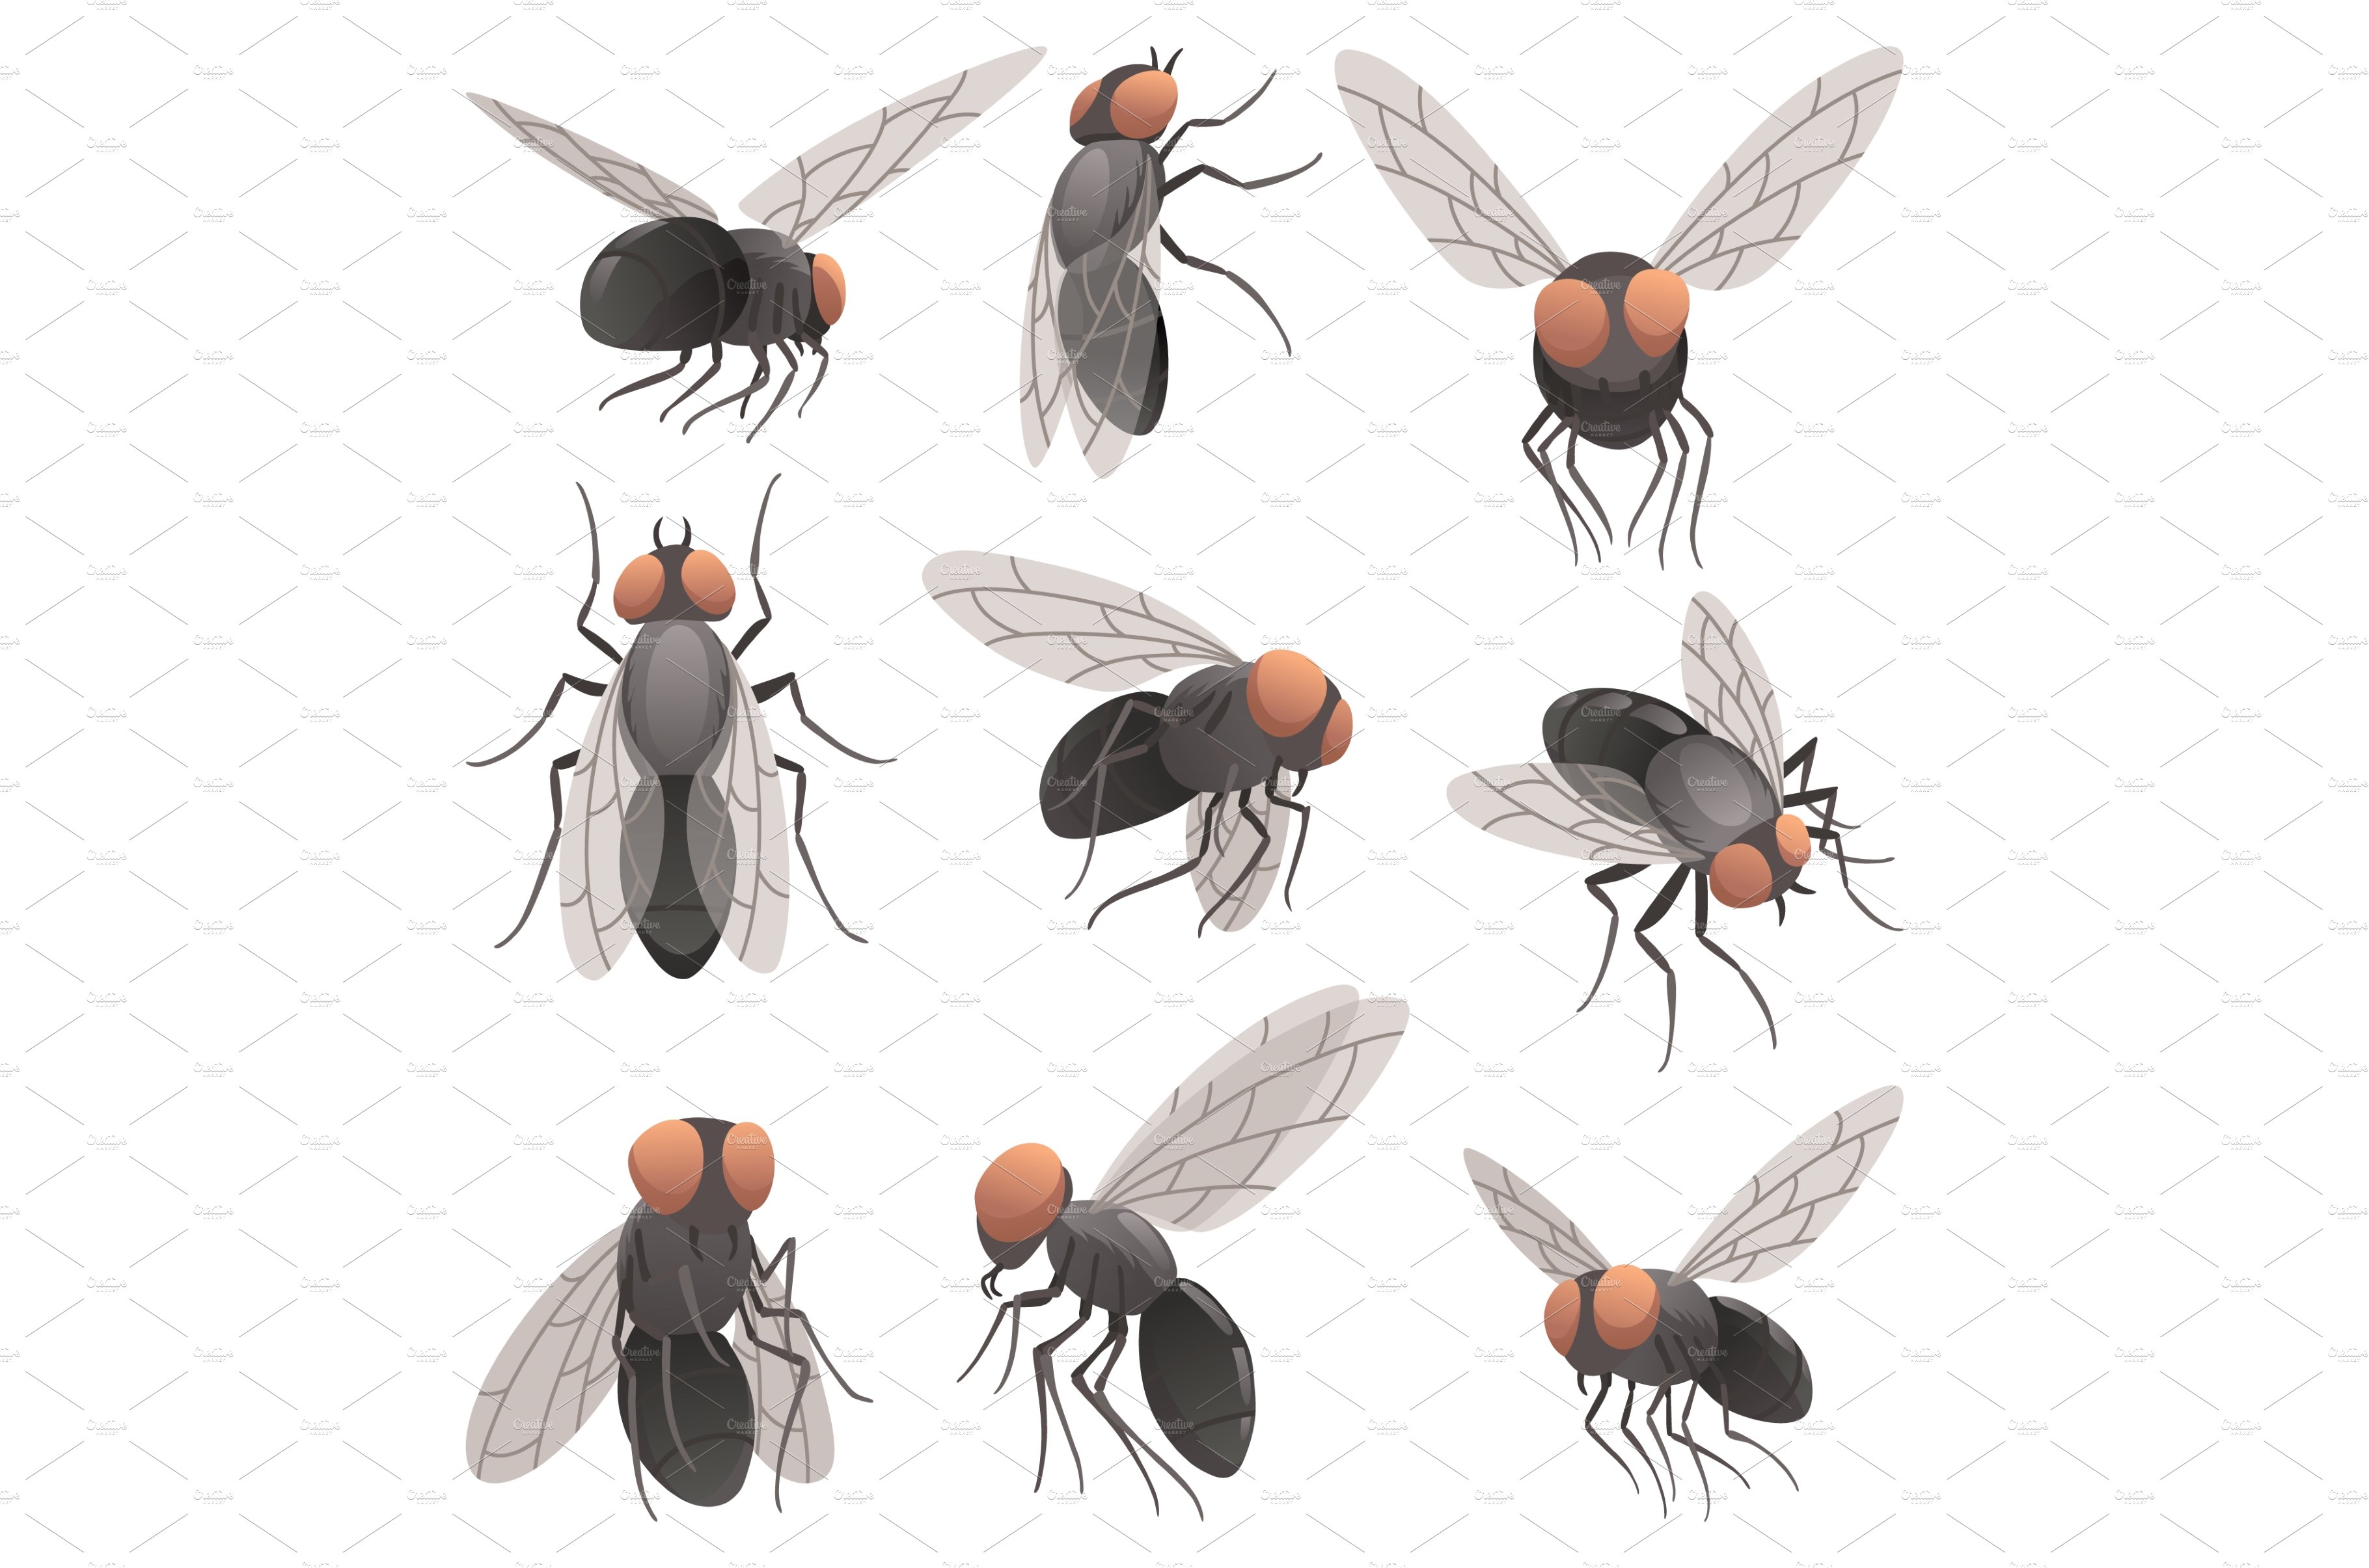 Housefly insect icon set. Wildlife cover image.